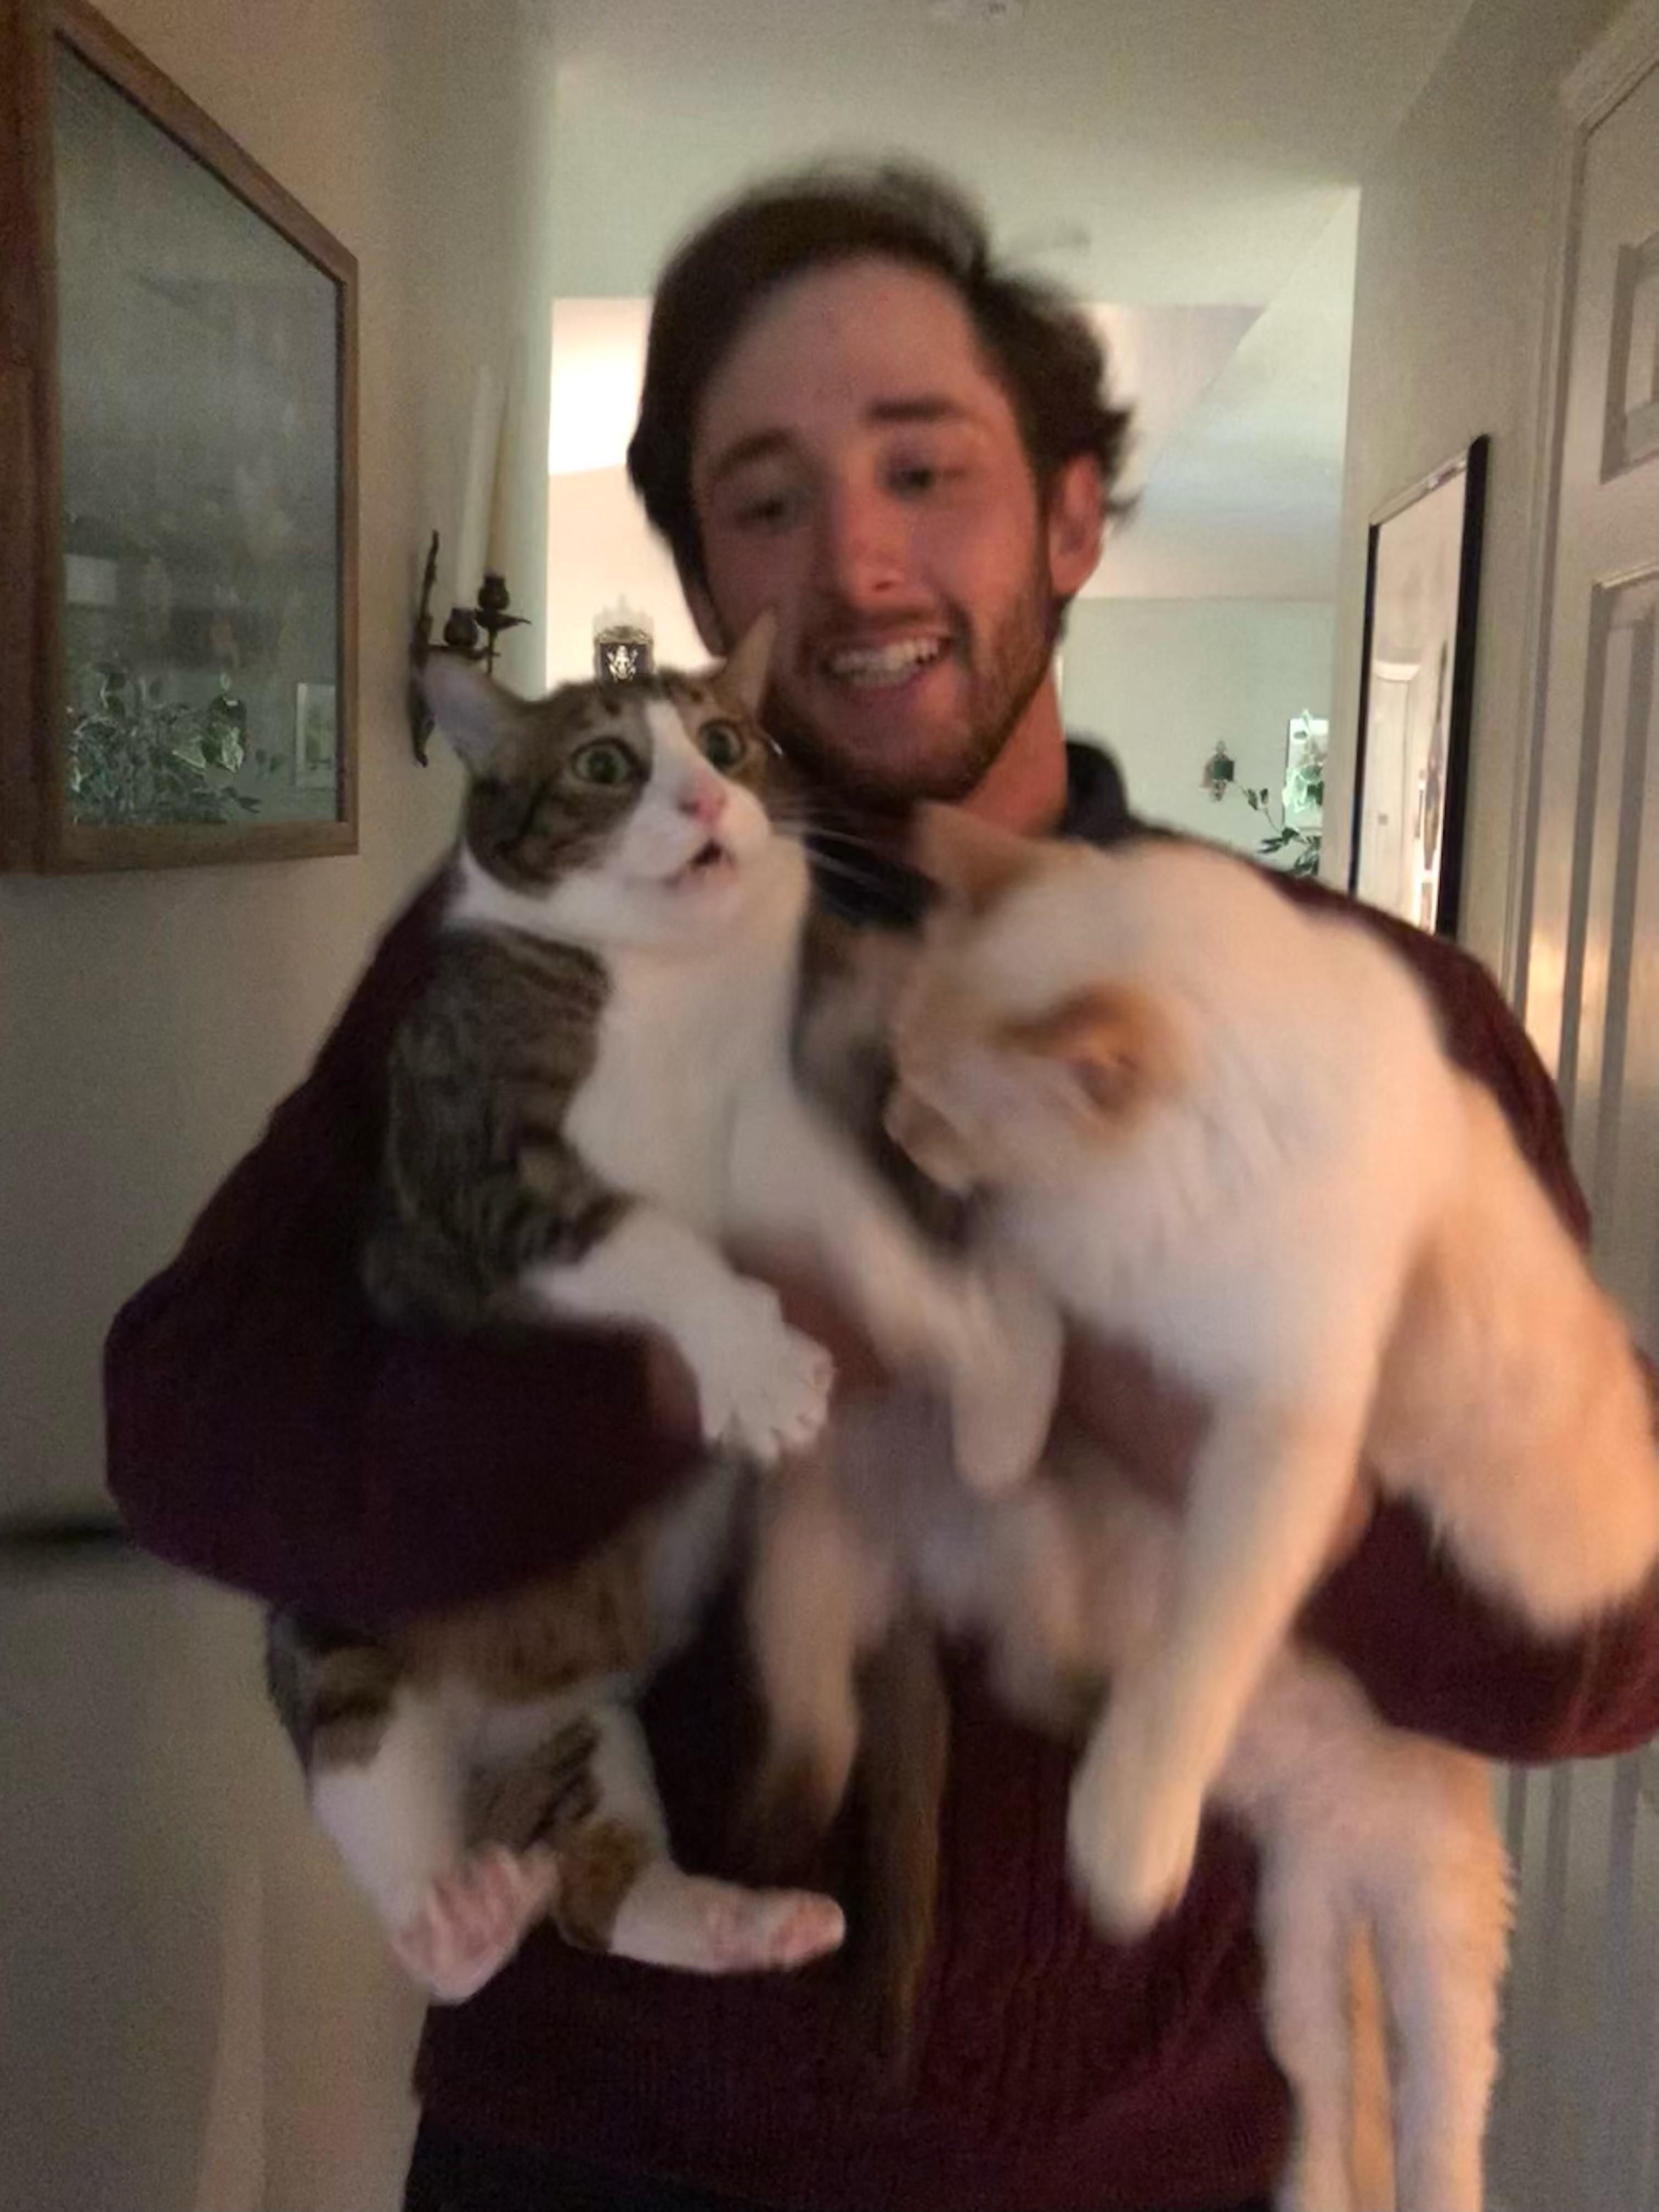 I attempted to take a pic with all 3 of my cats